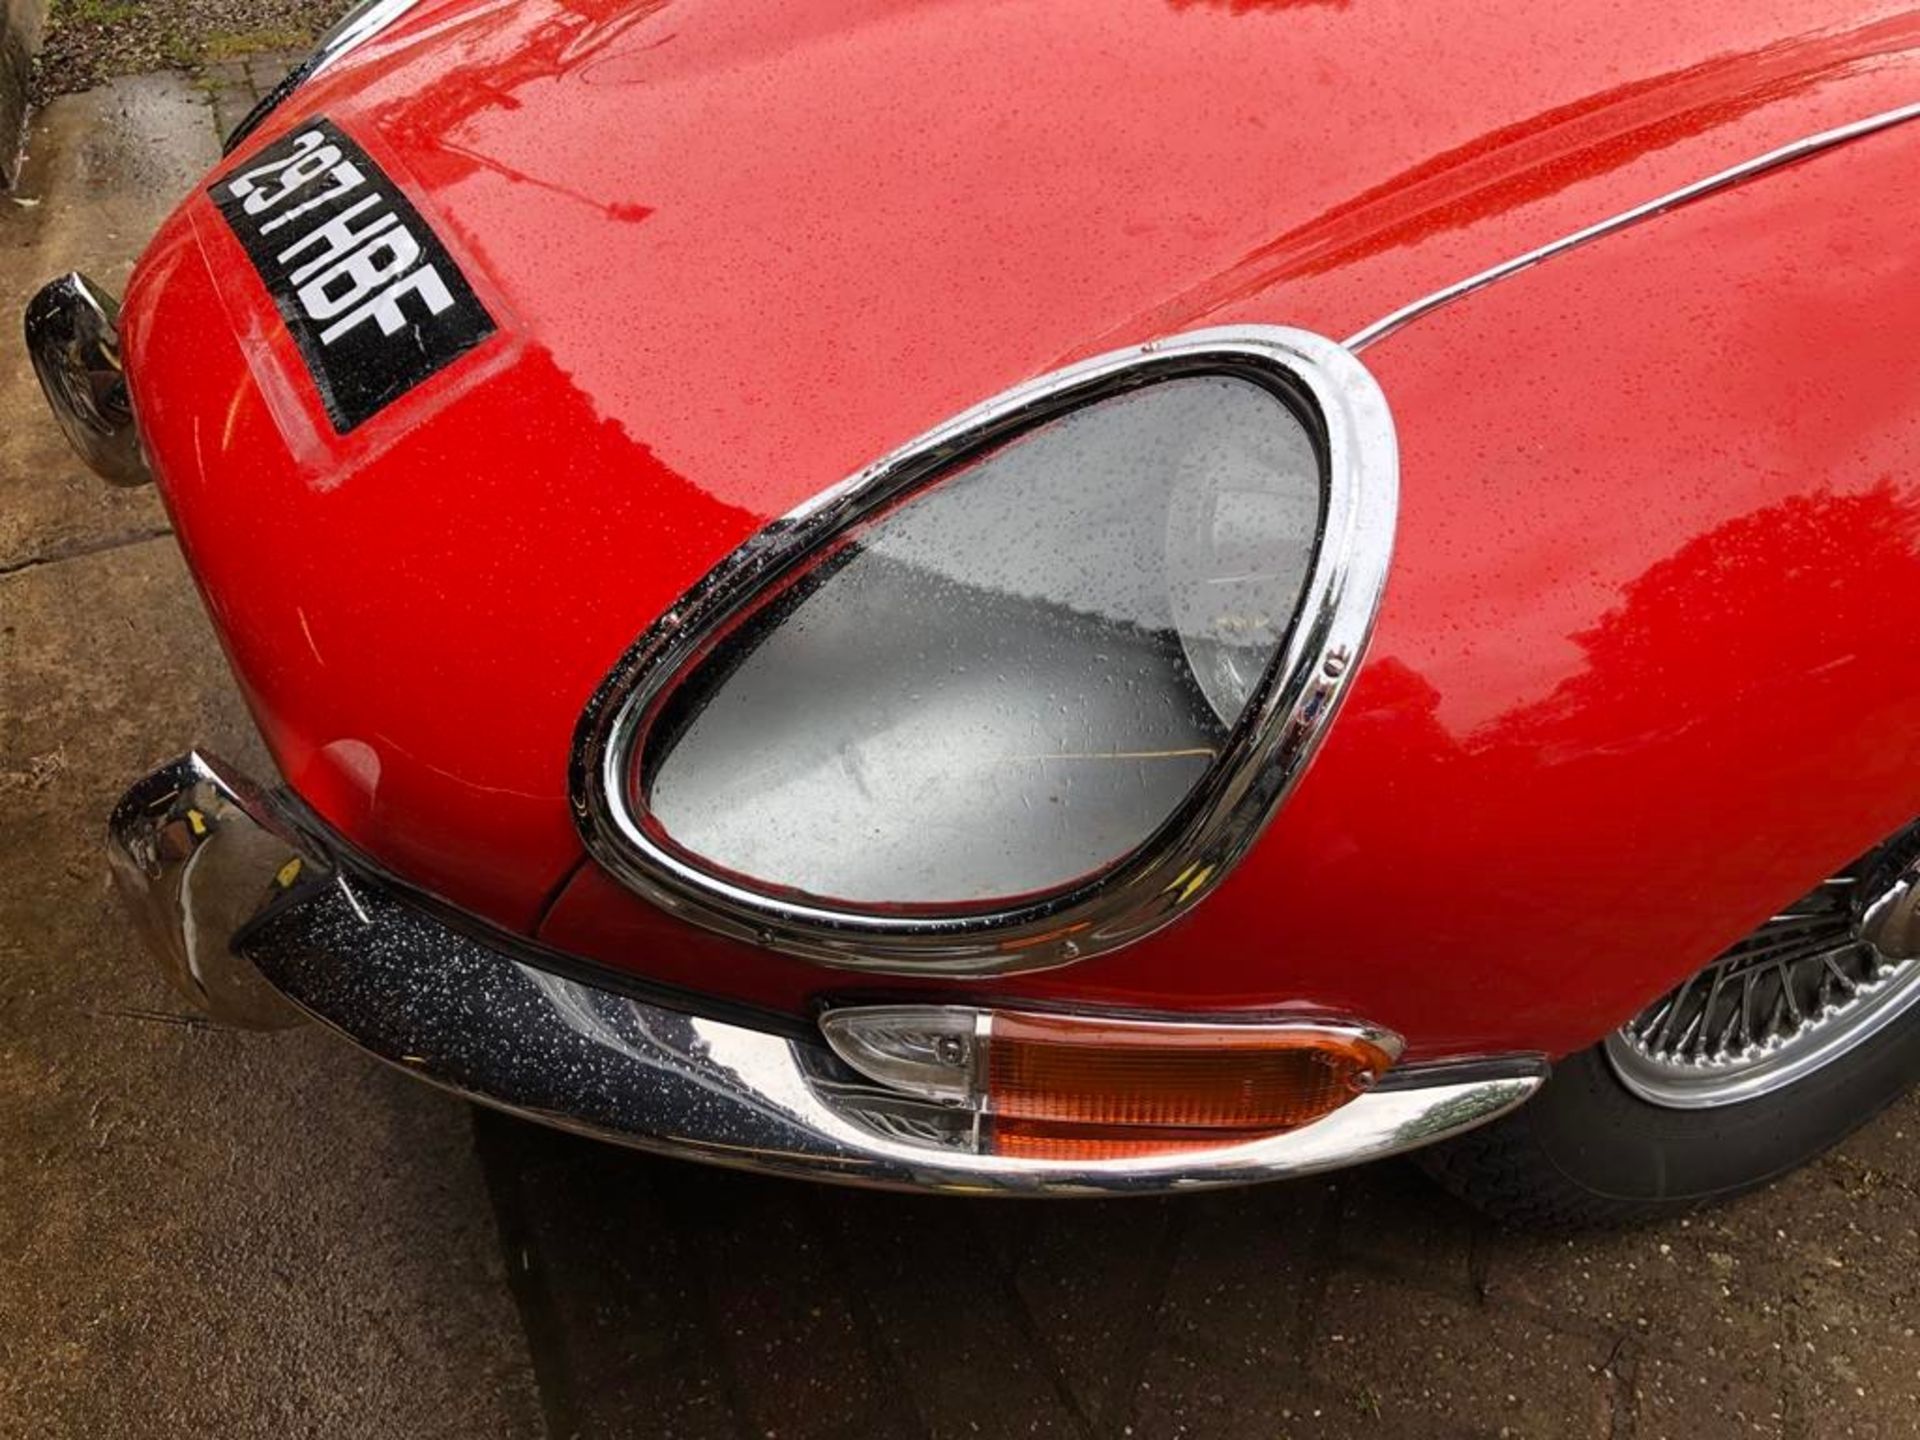 1962 Jaguar E-Type 3.8 Fixed Head Coupé Registration number 297 HBF Chassis number 860773 Engine - Image 71 of 160